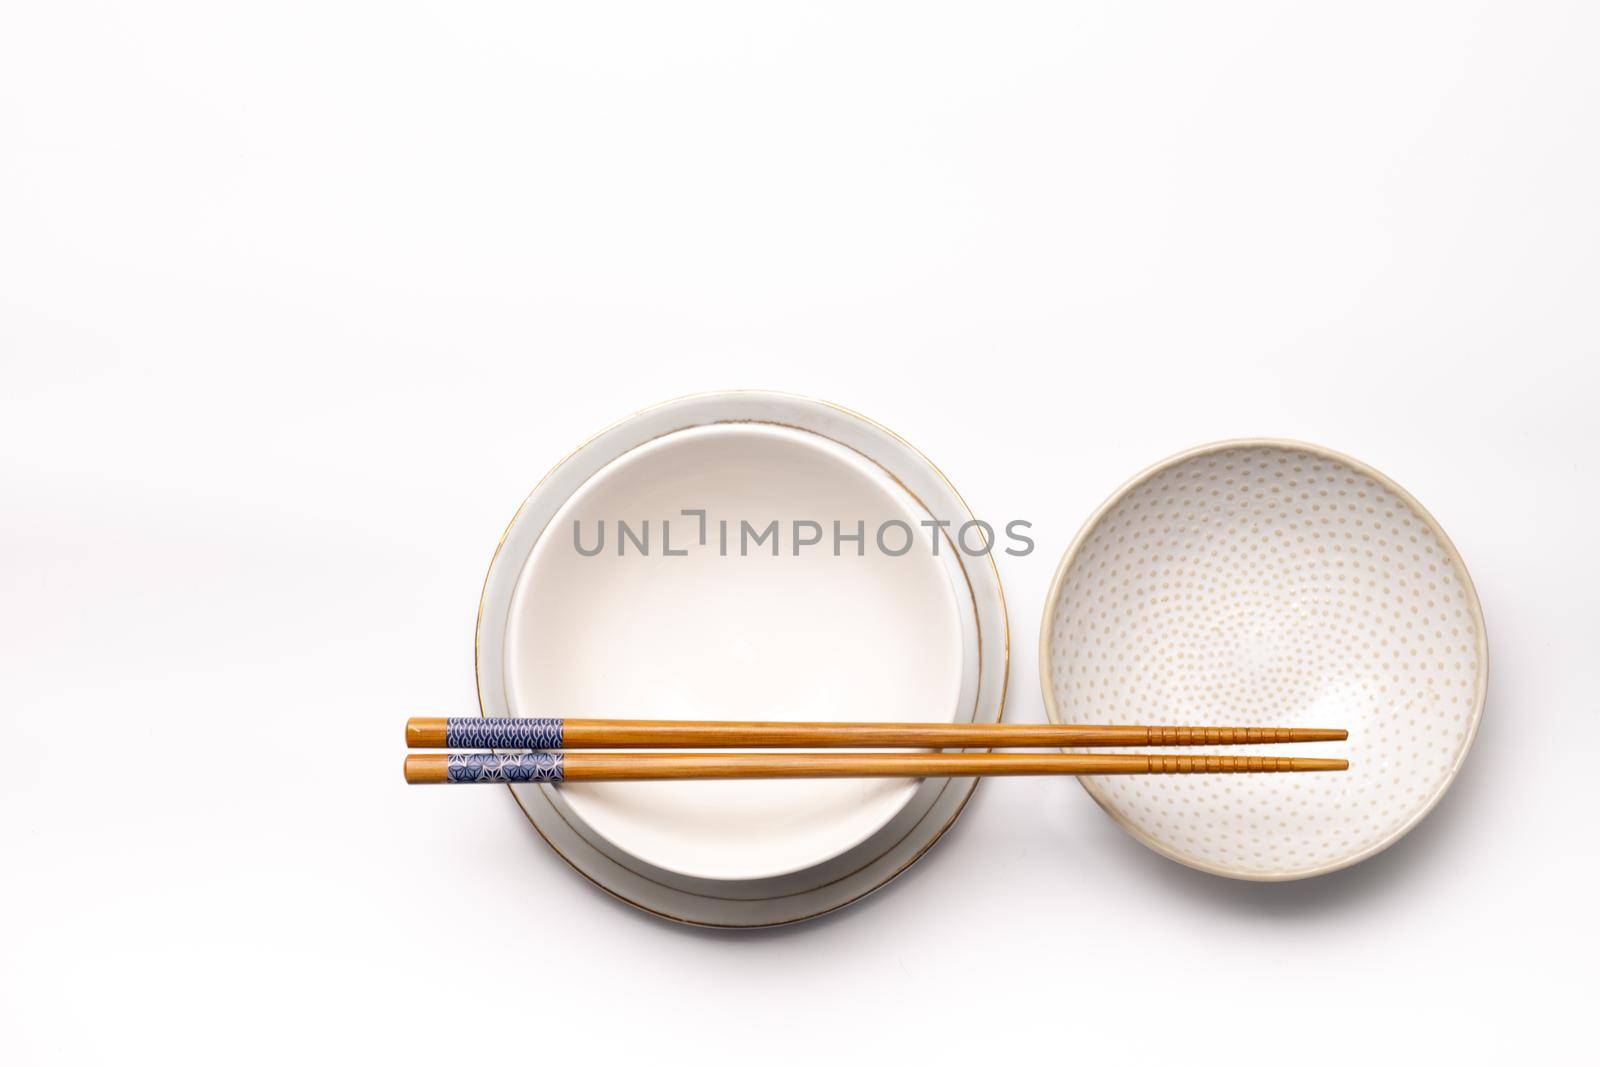 Three empty dishes or cups of blanc earthenware with chopsticks isolated on a white background seen from above or top view